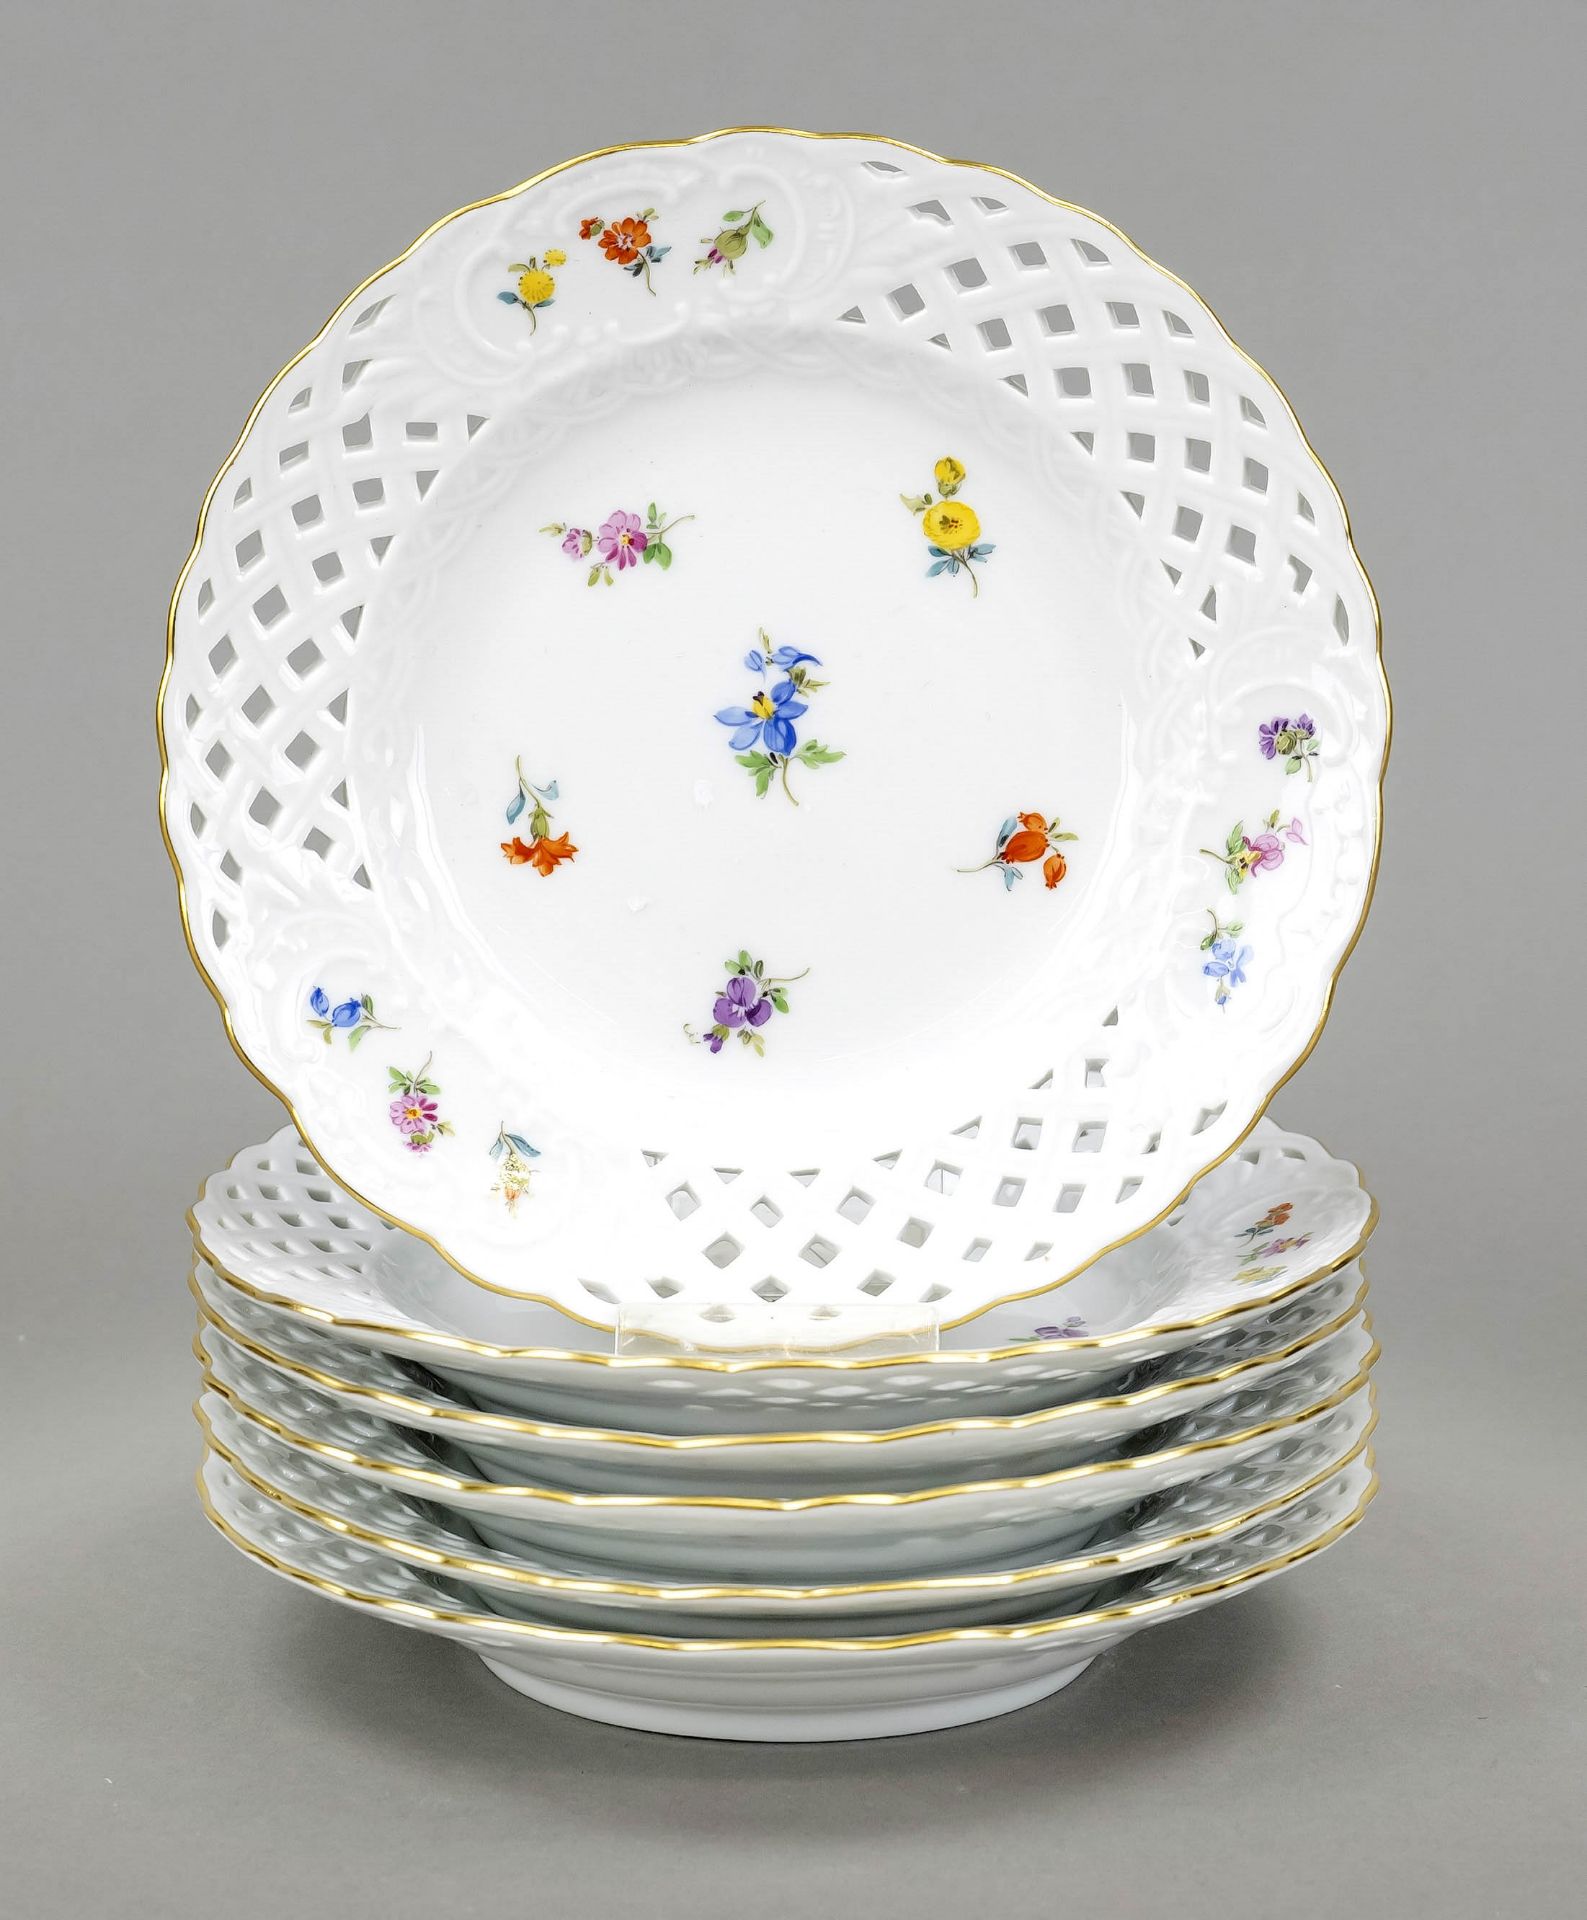 Six small breakthrough plates, Meissen, 1970s mark, 2nd choice, polychrome painted, decorated with